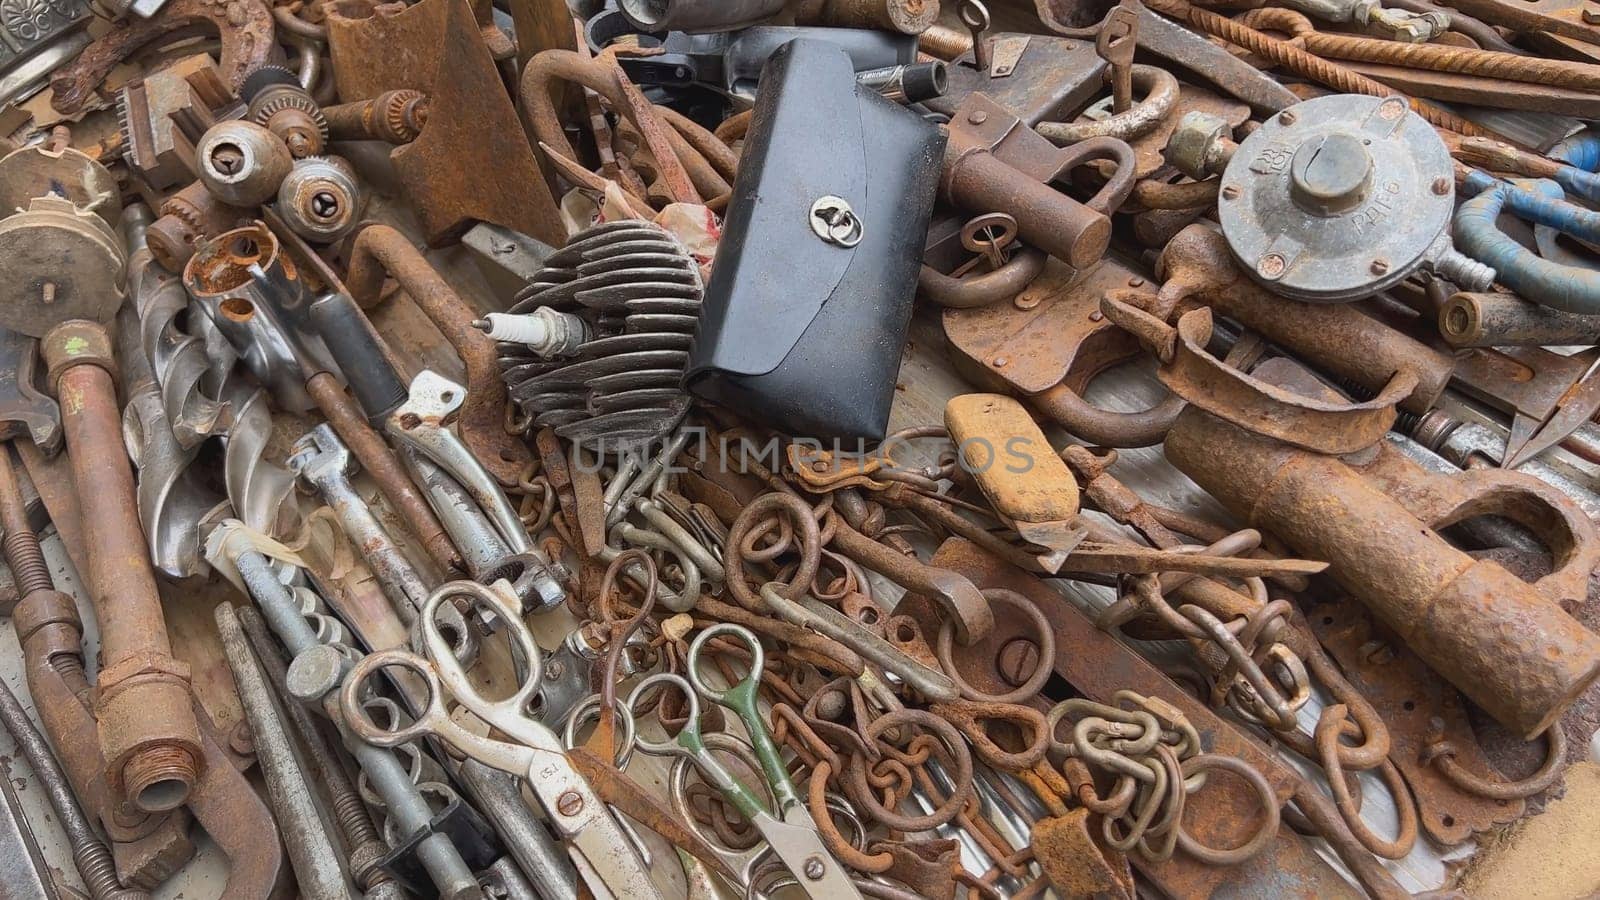 A flea market of old rusty things and tools. by DovidPro